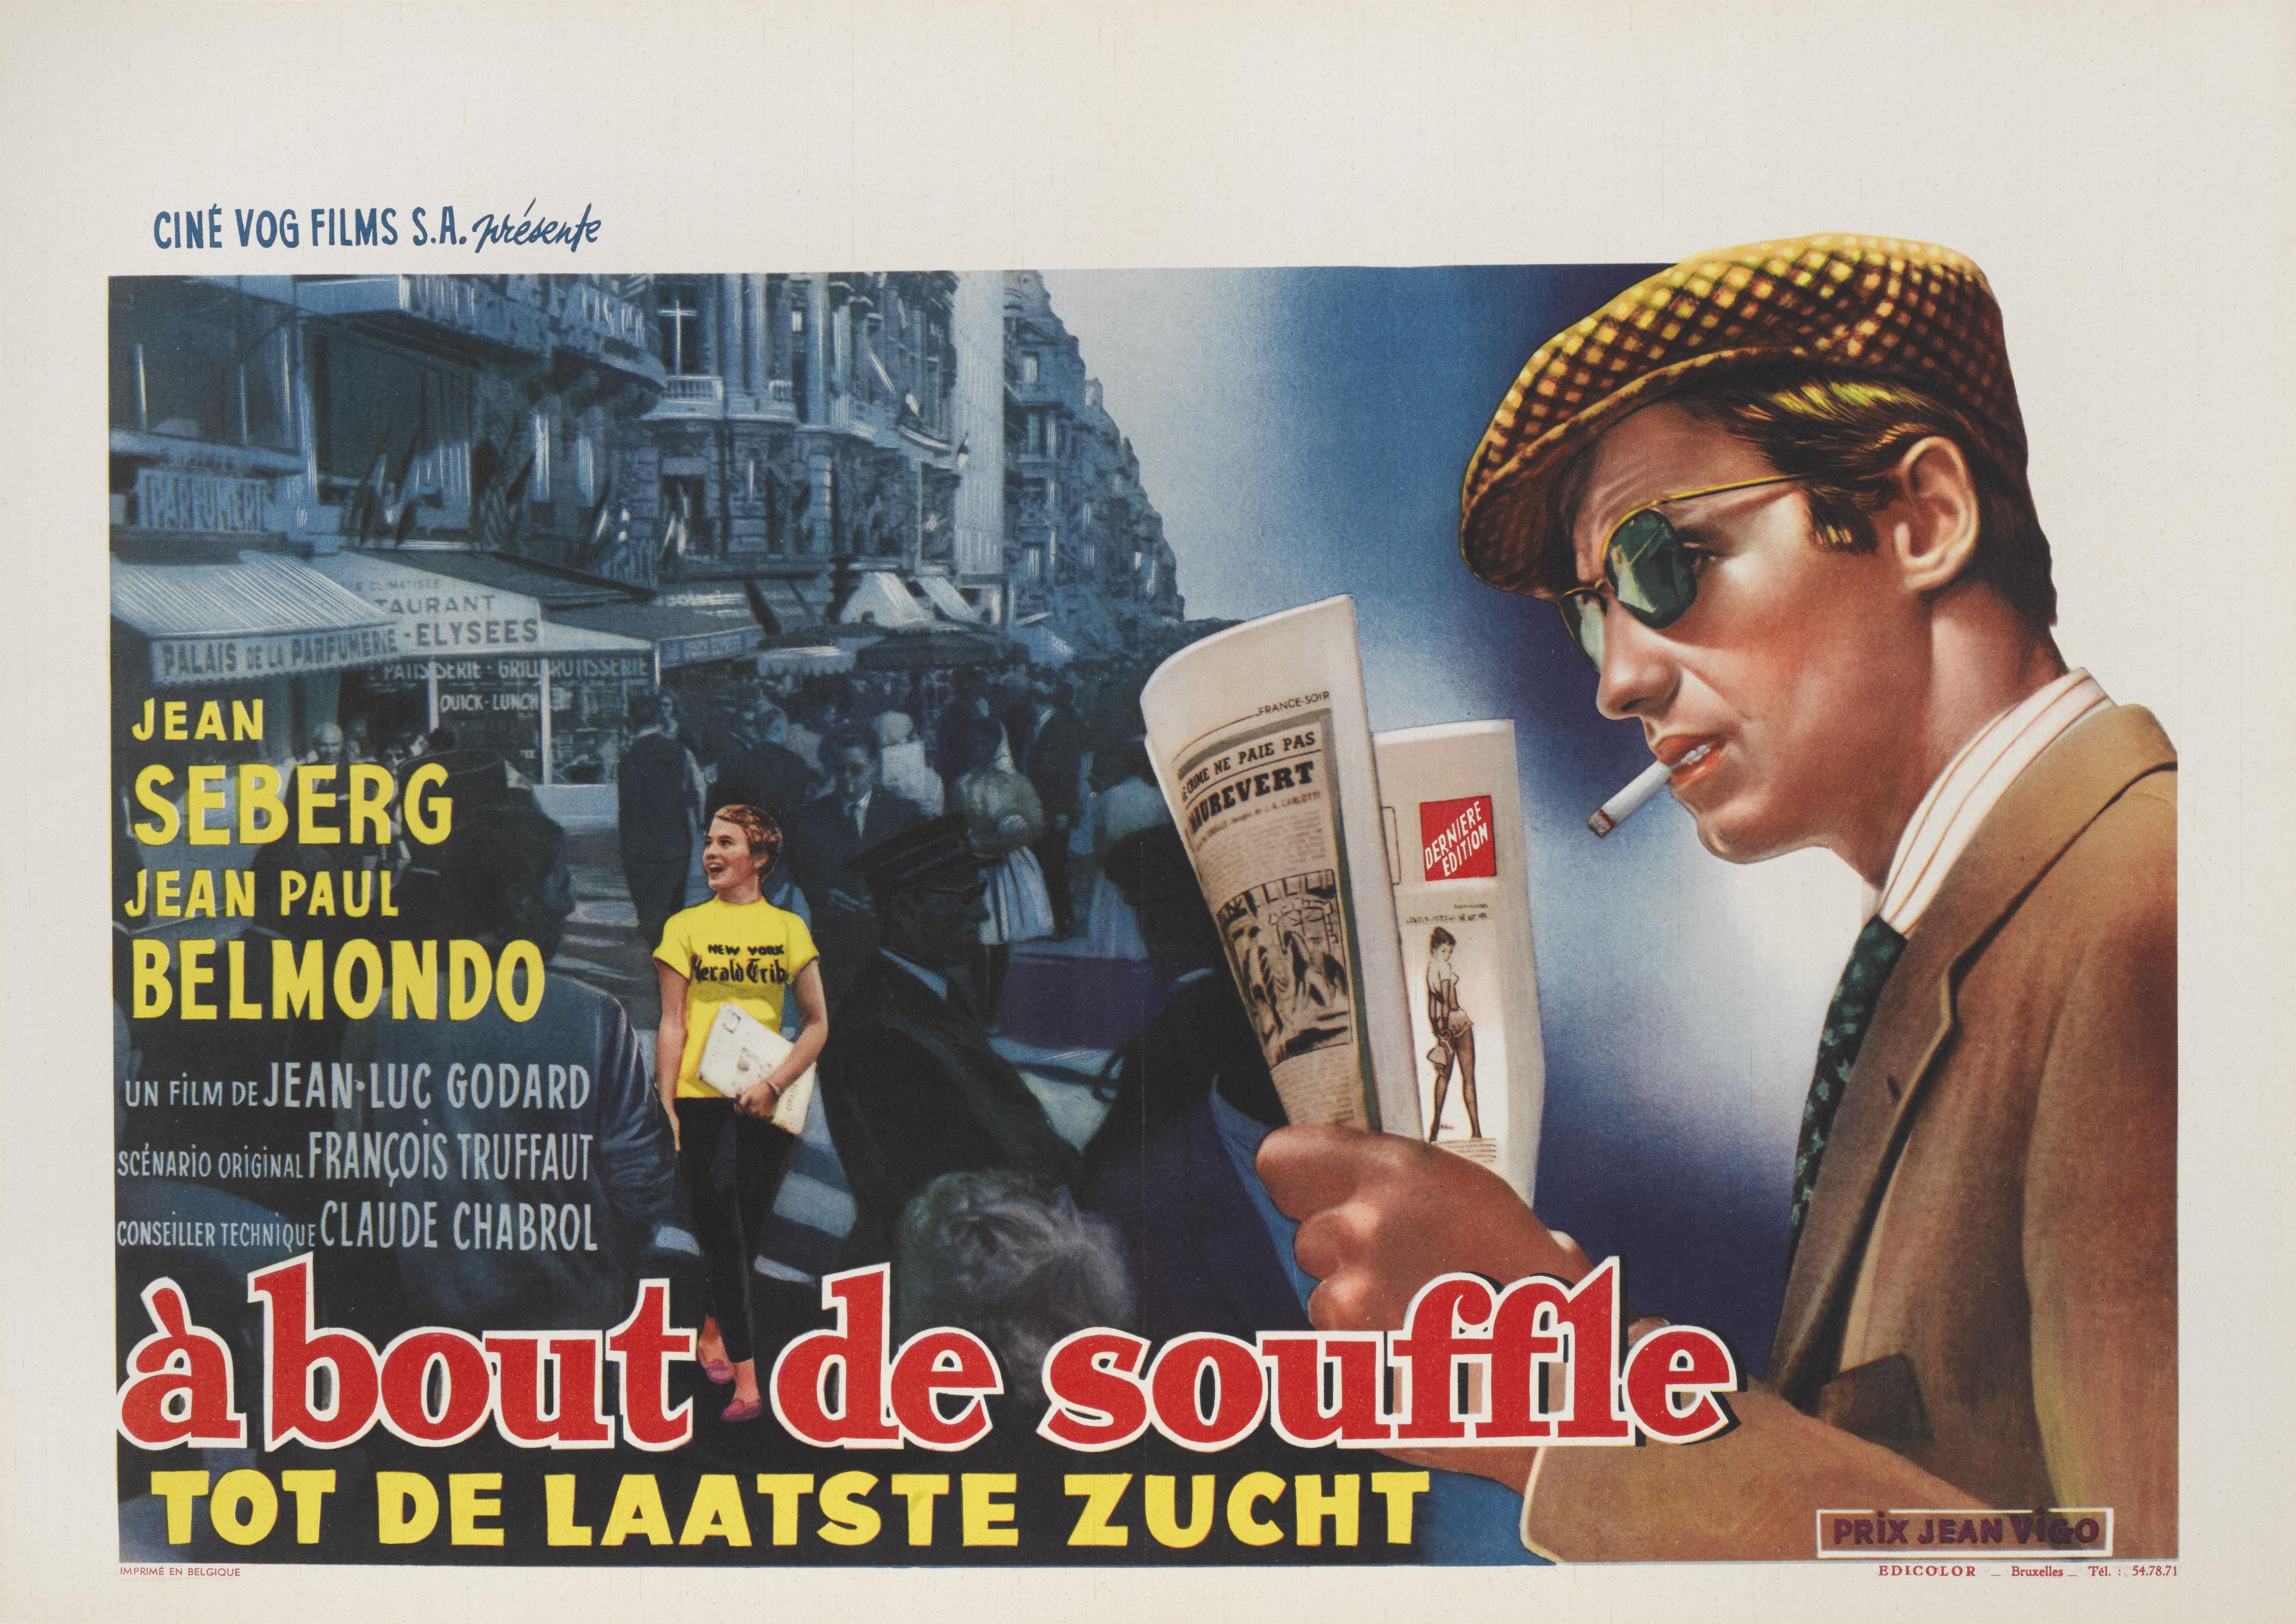 Original Belgium film poster from the Classic 1960 French New Wave film.
This is a 1960 French New Wave film written and directed by Jean-Luc Godard, starring Jean-Paul Belmondo as a small-time criminal, and Jean Seberg as his American girlfriend.